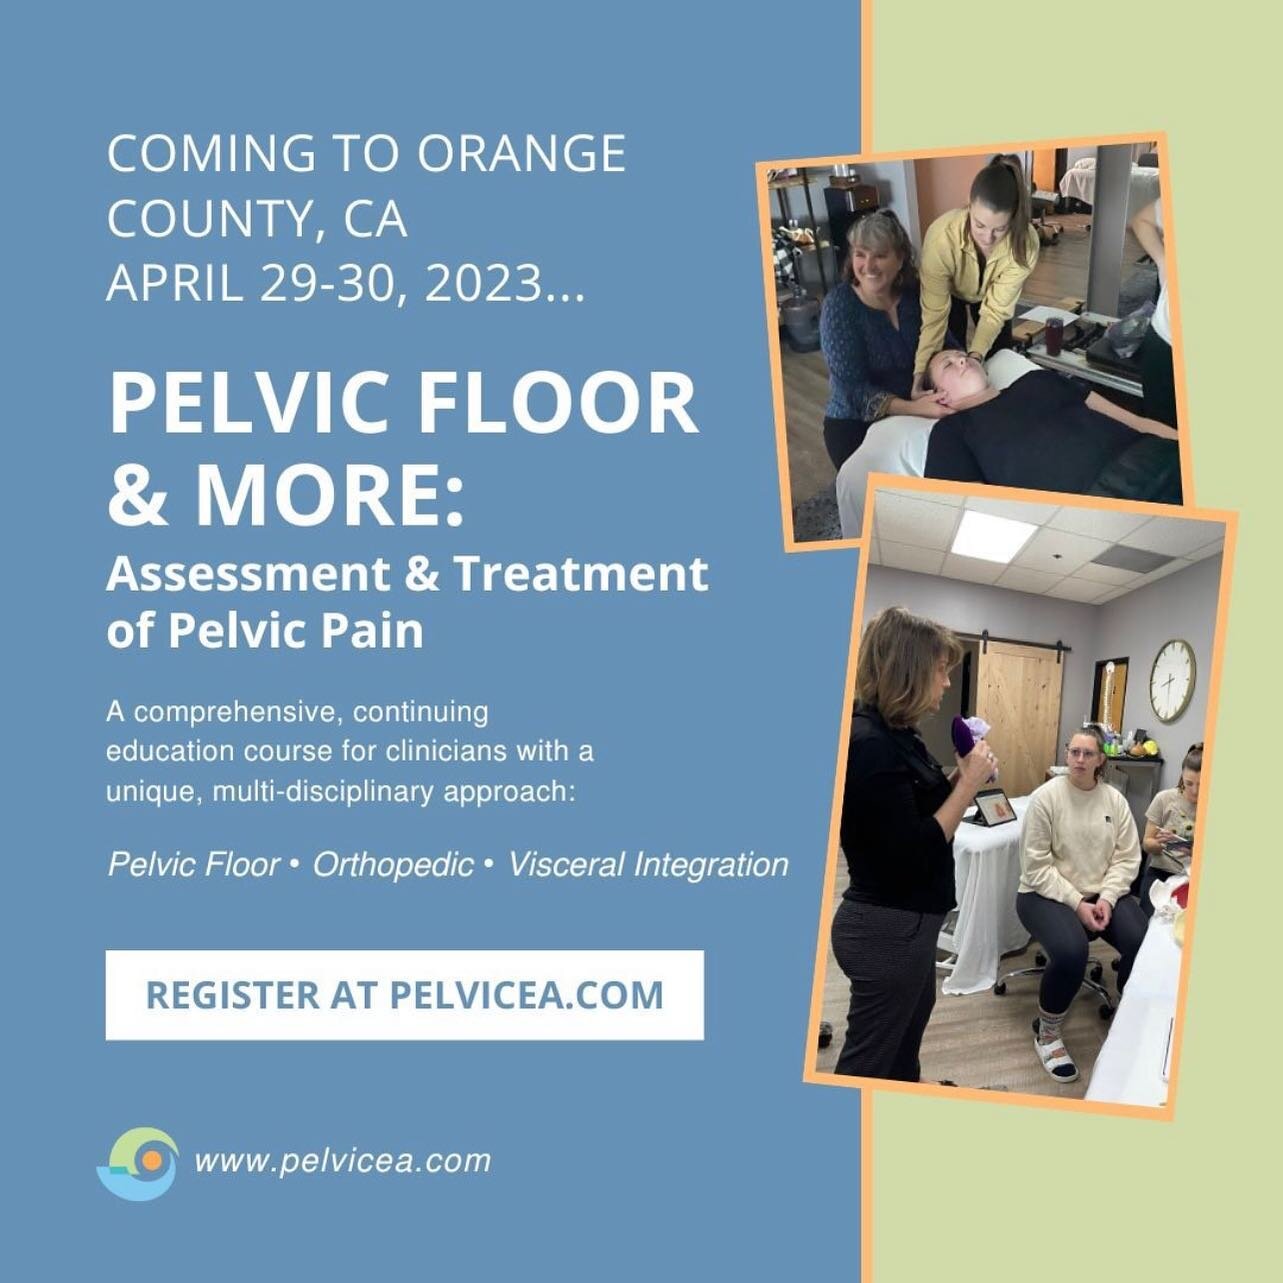 PELVIC FLOOR &amp; MORE: ASSESSMENT &amp; TREATMENT OF PELVIC PAIN IS COMING BACK TO ORANGE COUNTY, CA!!!!

🗓 April 29-30th, 2023!!

Calling all PTs, PTAs, OTs, Physicians, and Nurses&hellip;. if you are looking to level up your practice and gain ne